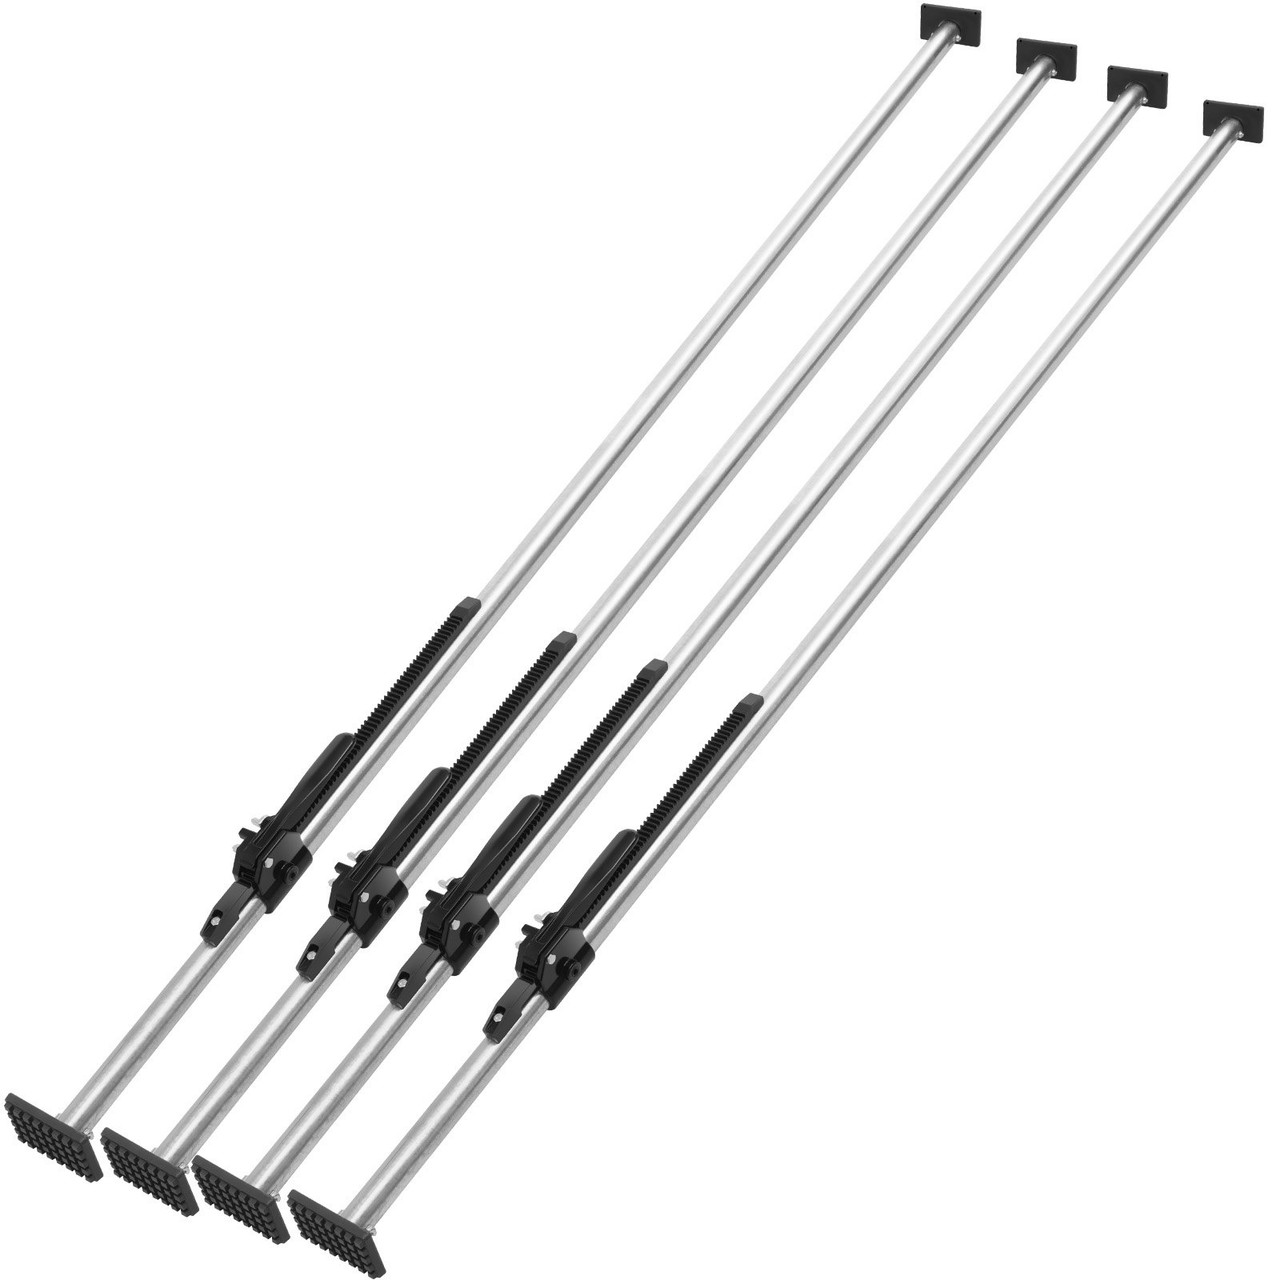 VEVOR Cargo Bar, Ratcheting Cargo Bar Adjustable from 89" to 104", Heavy-duty Steel Cargo Stabilizer Bar with 309 lbs Capacity, Truck Bed Load Bar for Pickup Truck Bed, Trailer, Semi Trailer (4 pcs)